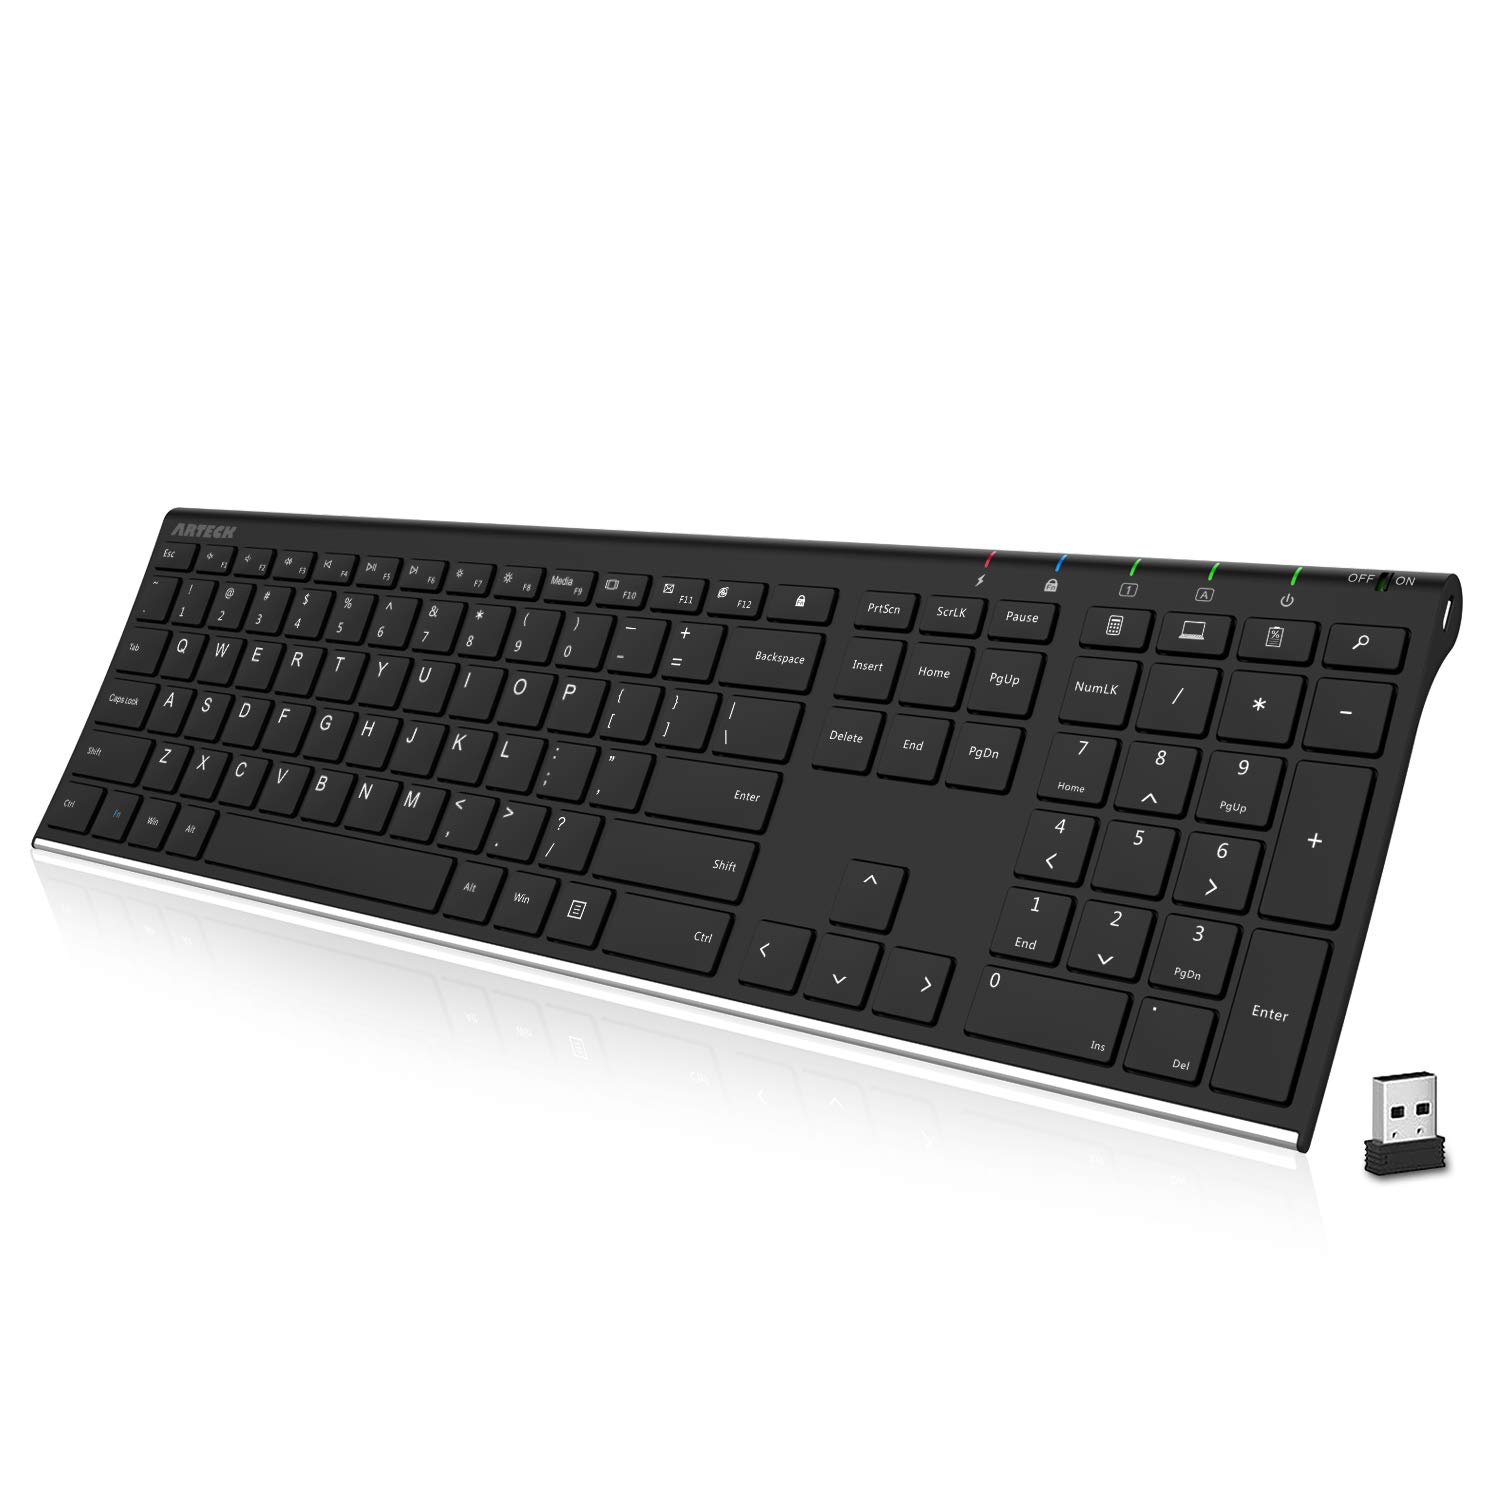 Book Cover Arteck 2.4G Wireless Keyboard Stainless Steel Ultra Slim Full Size Keyboard with Numeric Keypad for Computer/Desktop/PC/Laptop/Surface/Smart TV and Windows 10/8/ 7 Built in Rechargeable Battery